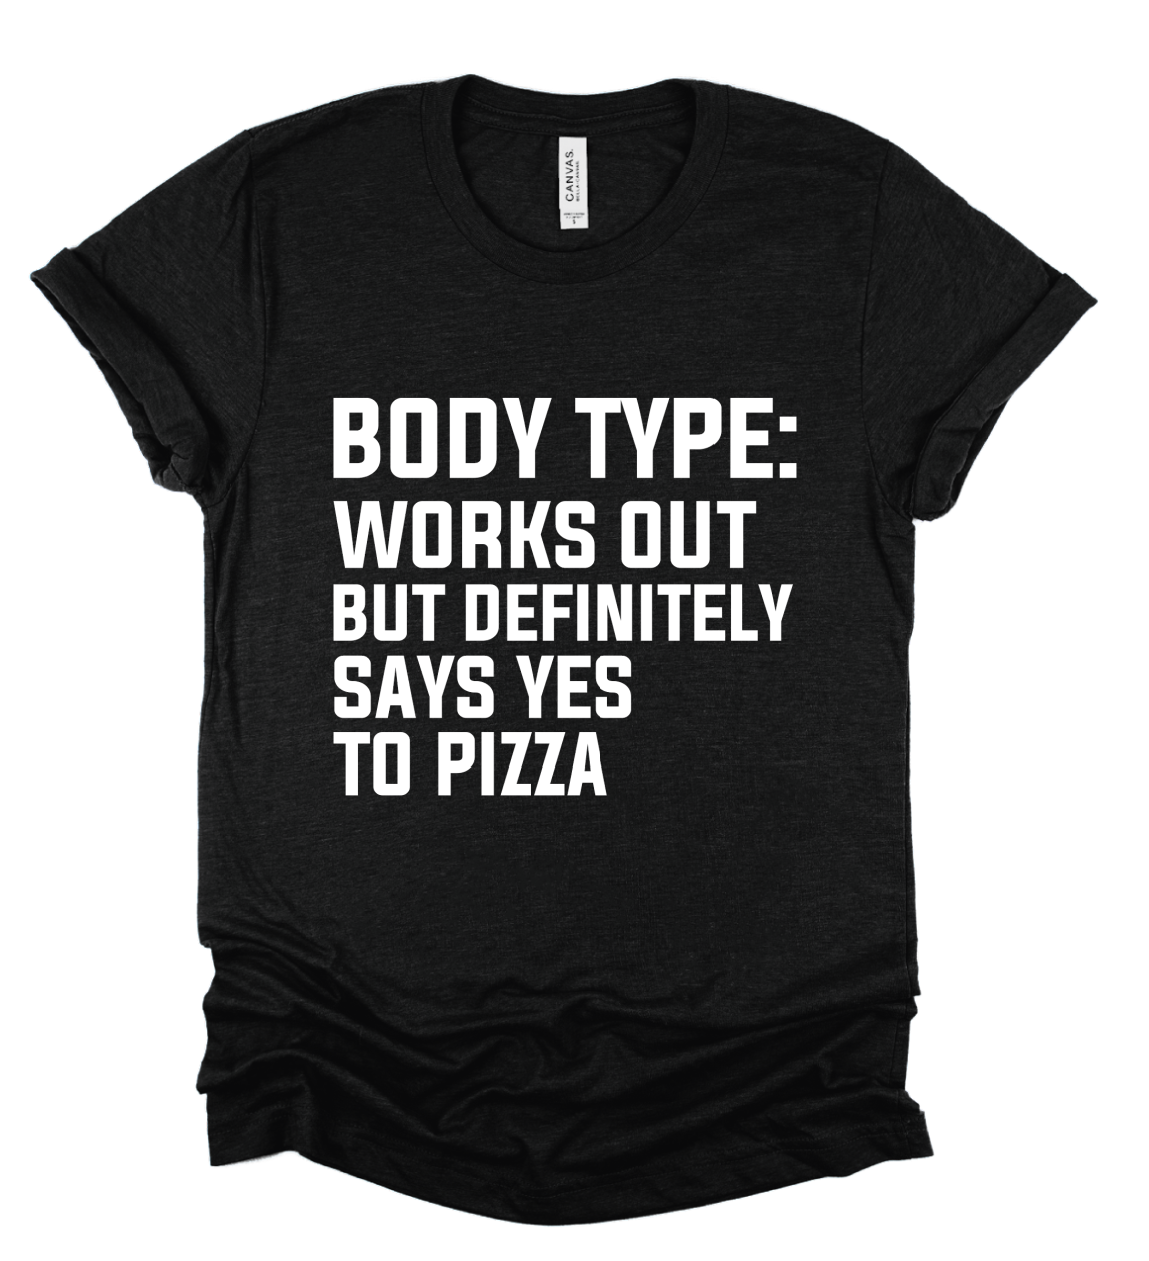 Body Type: Works Out But Definitely Says Yes to Pizza Tee /Workout Tee/ Funny Tee